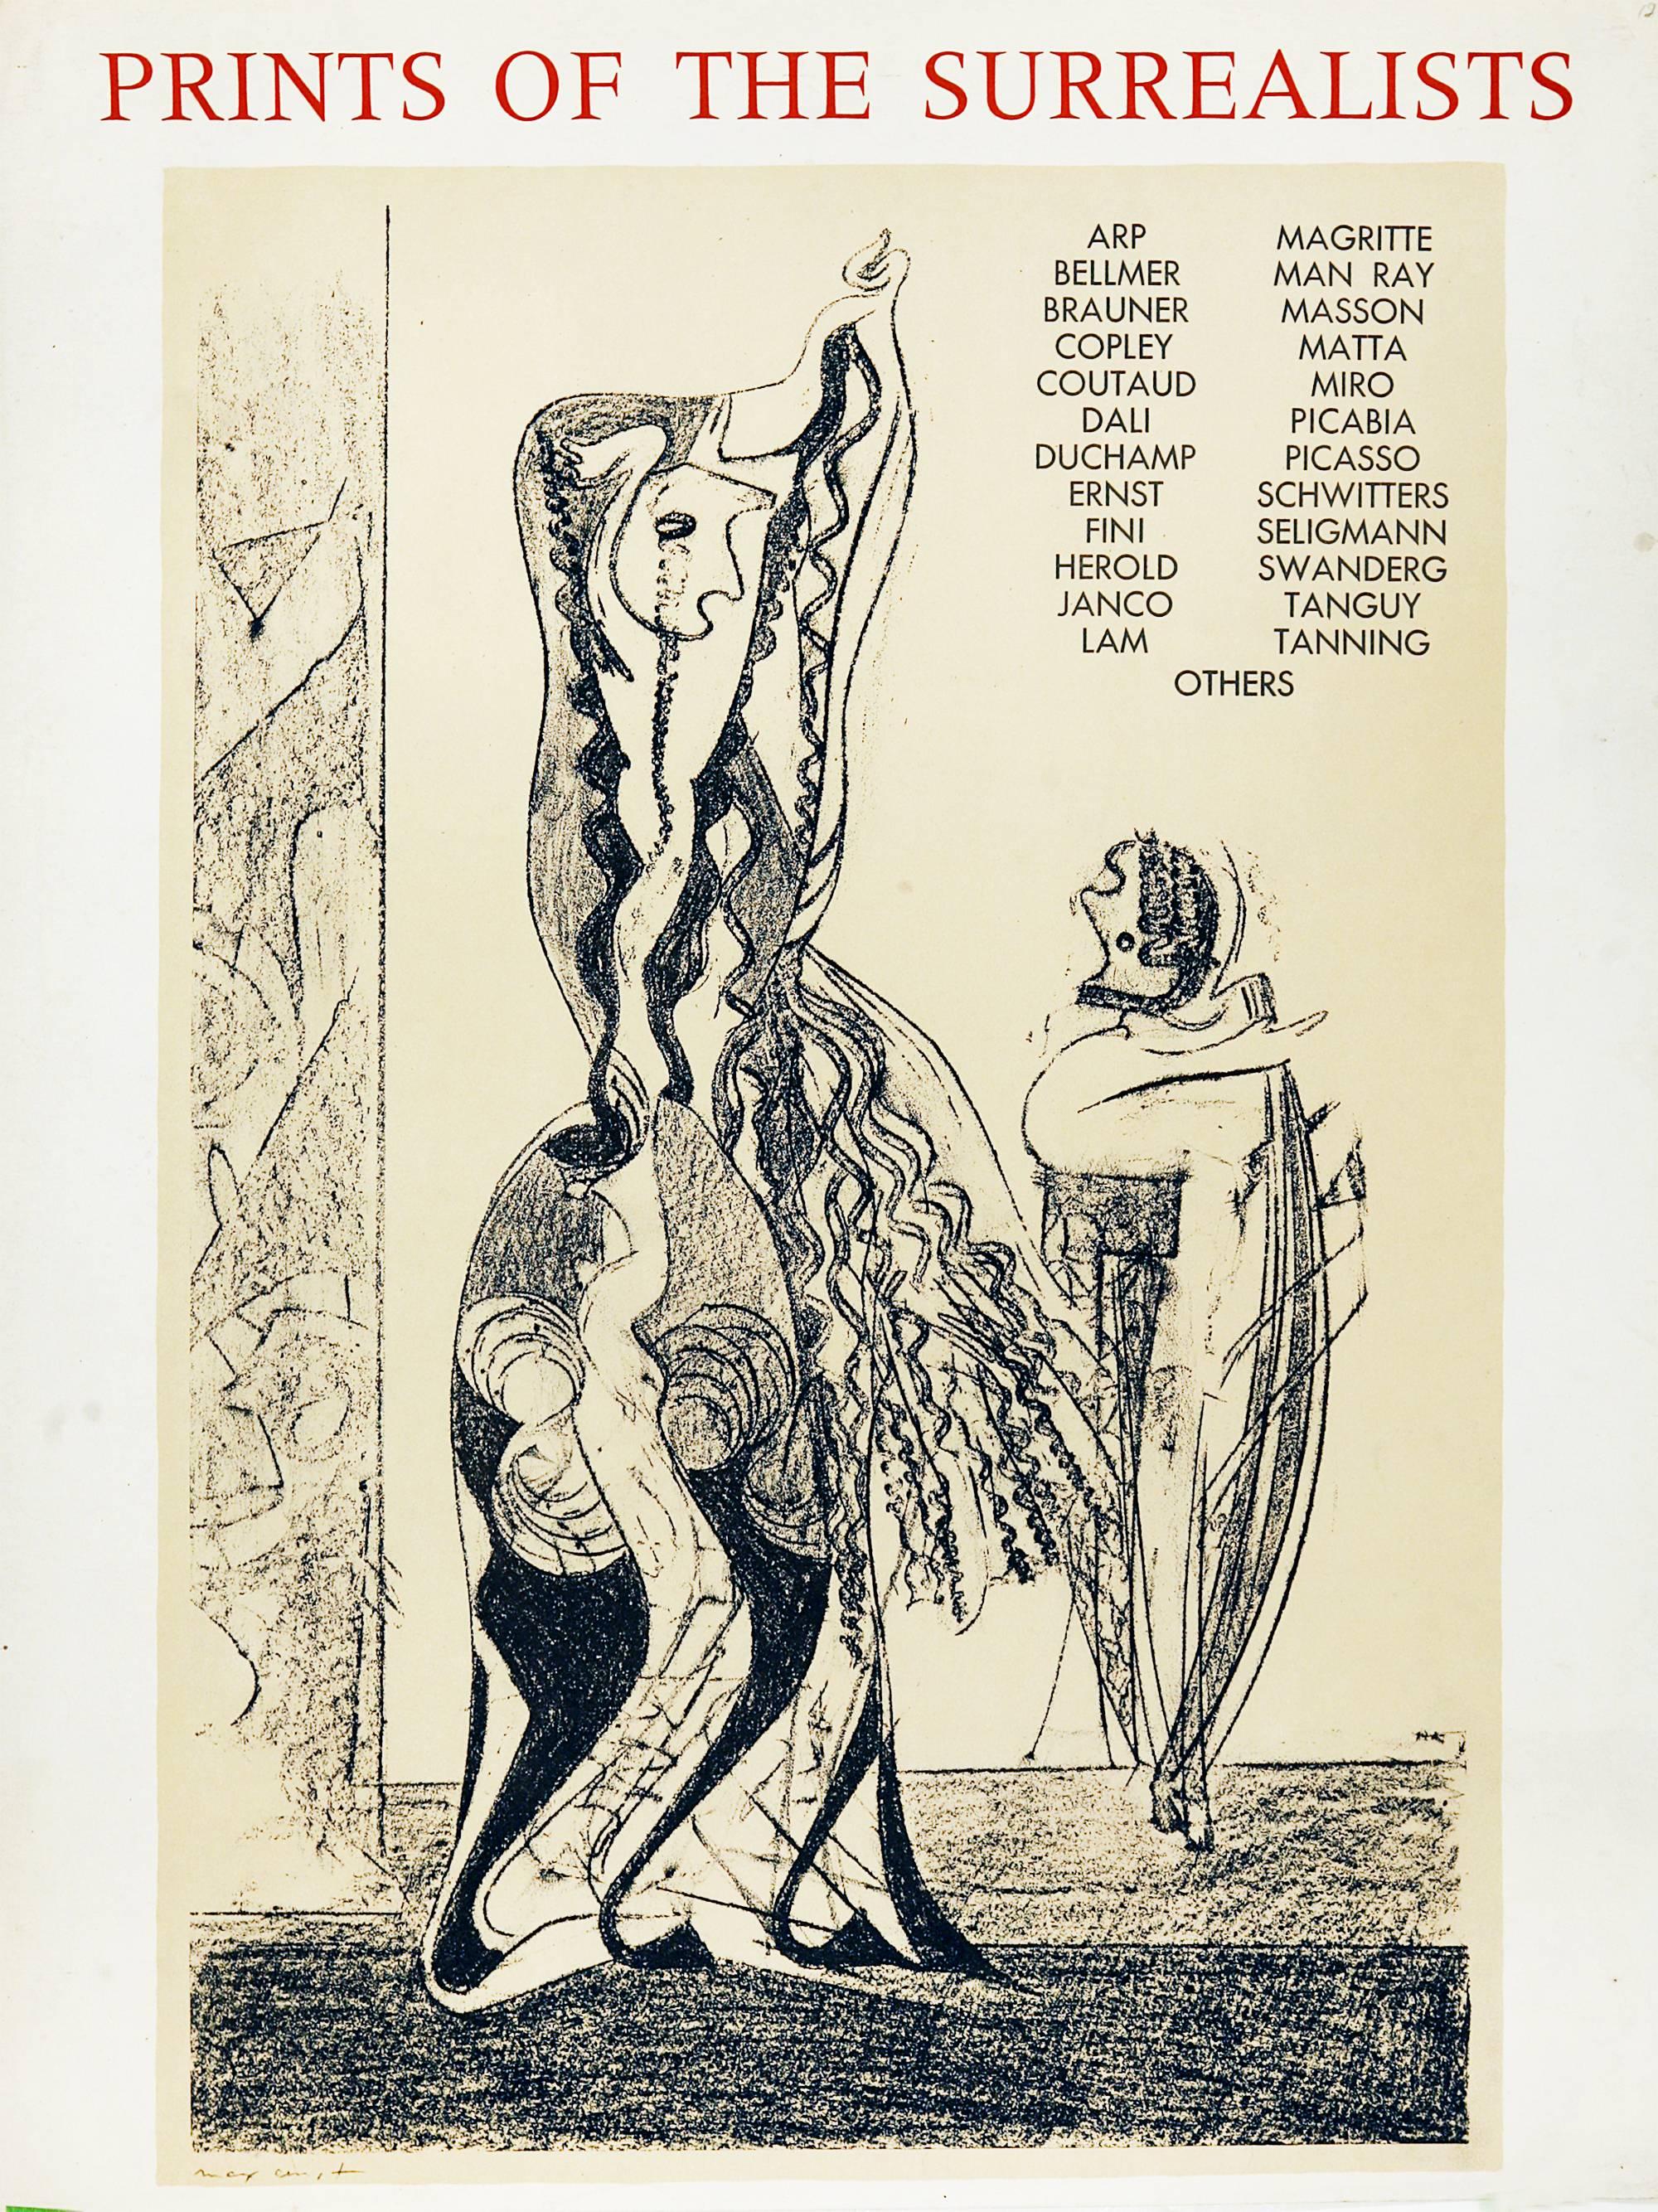 Max Ernst Figurative Print - Rare Exhibit Poster for "Prints of the Surrealists"